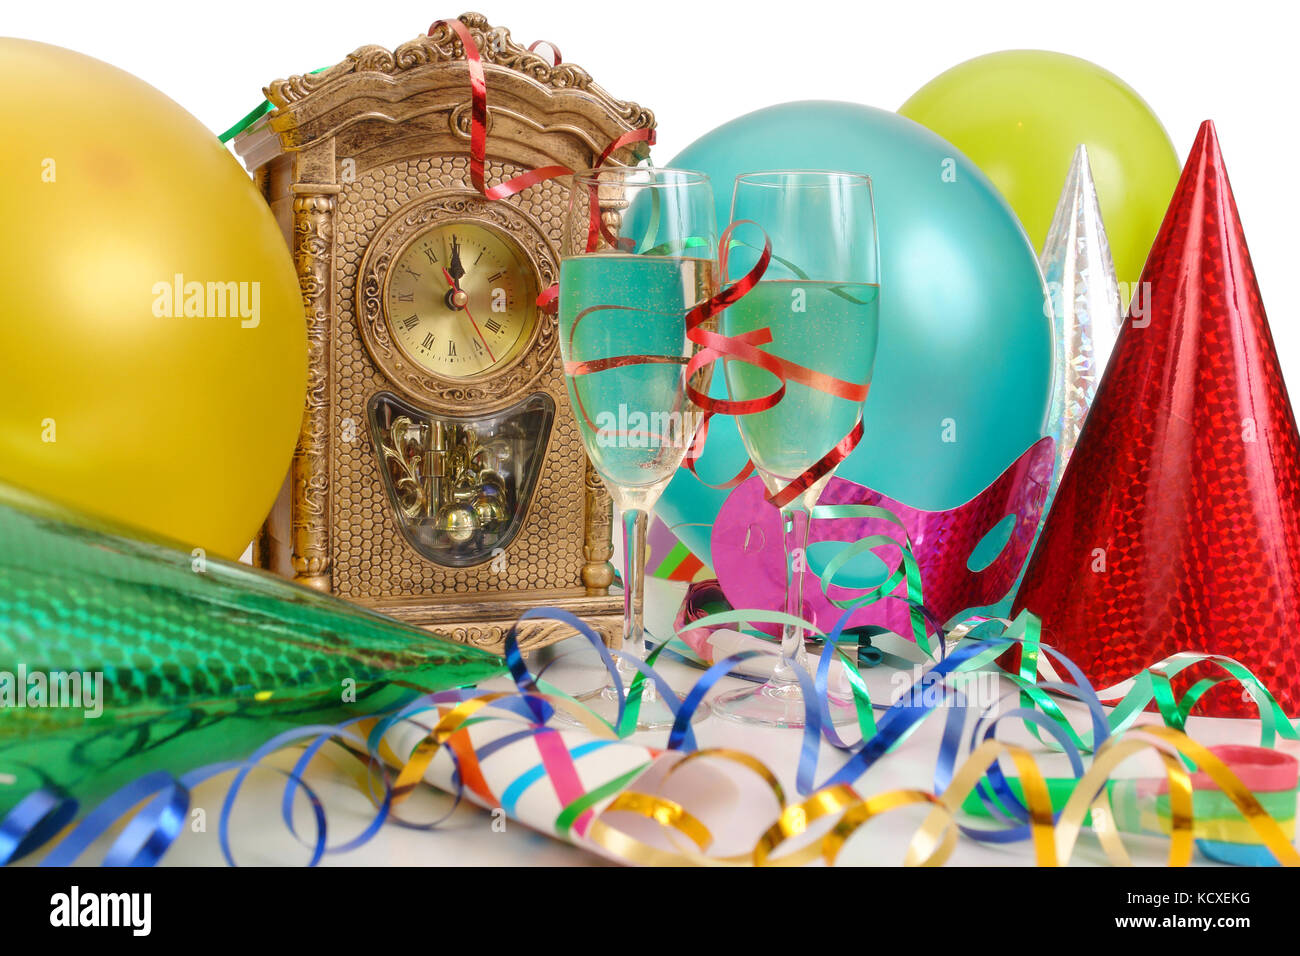 Table clock showing almost New Year's time, streamers, balloons, party hats and two glasses of champagne Stock Photo